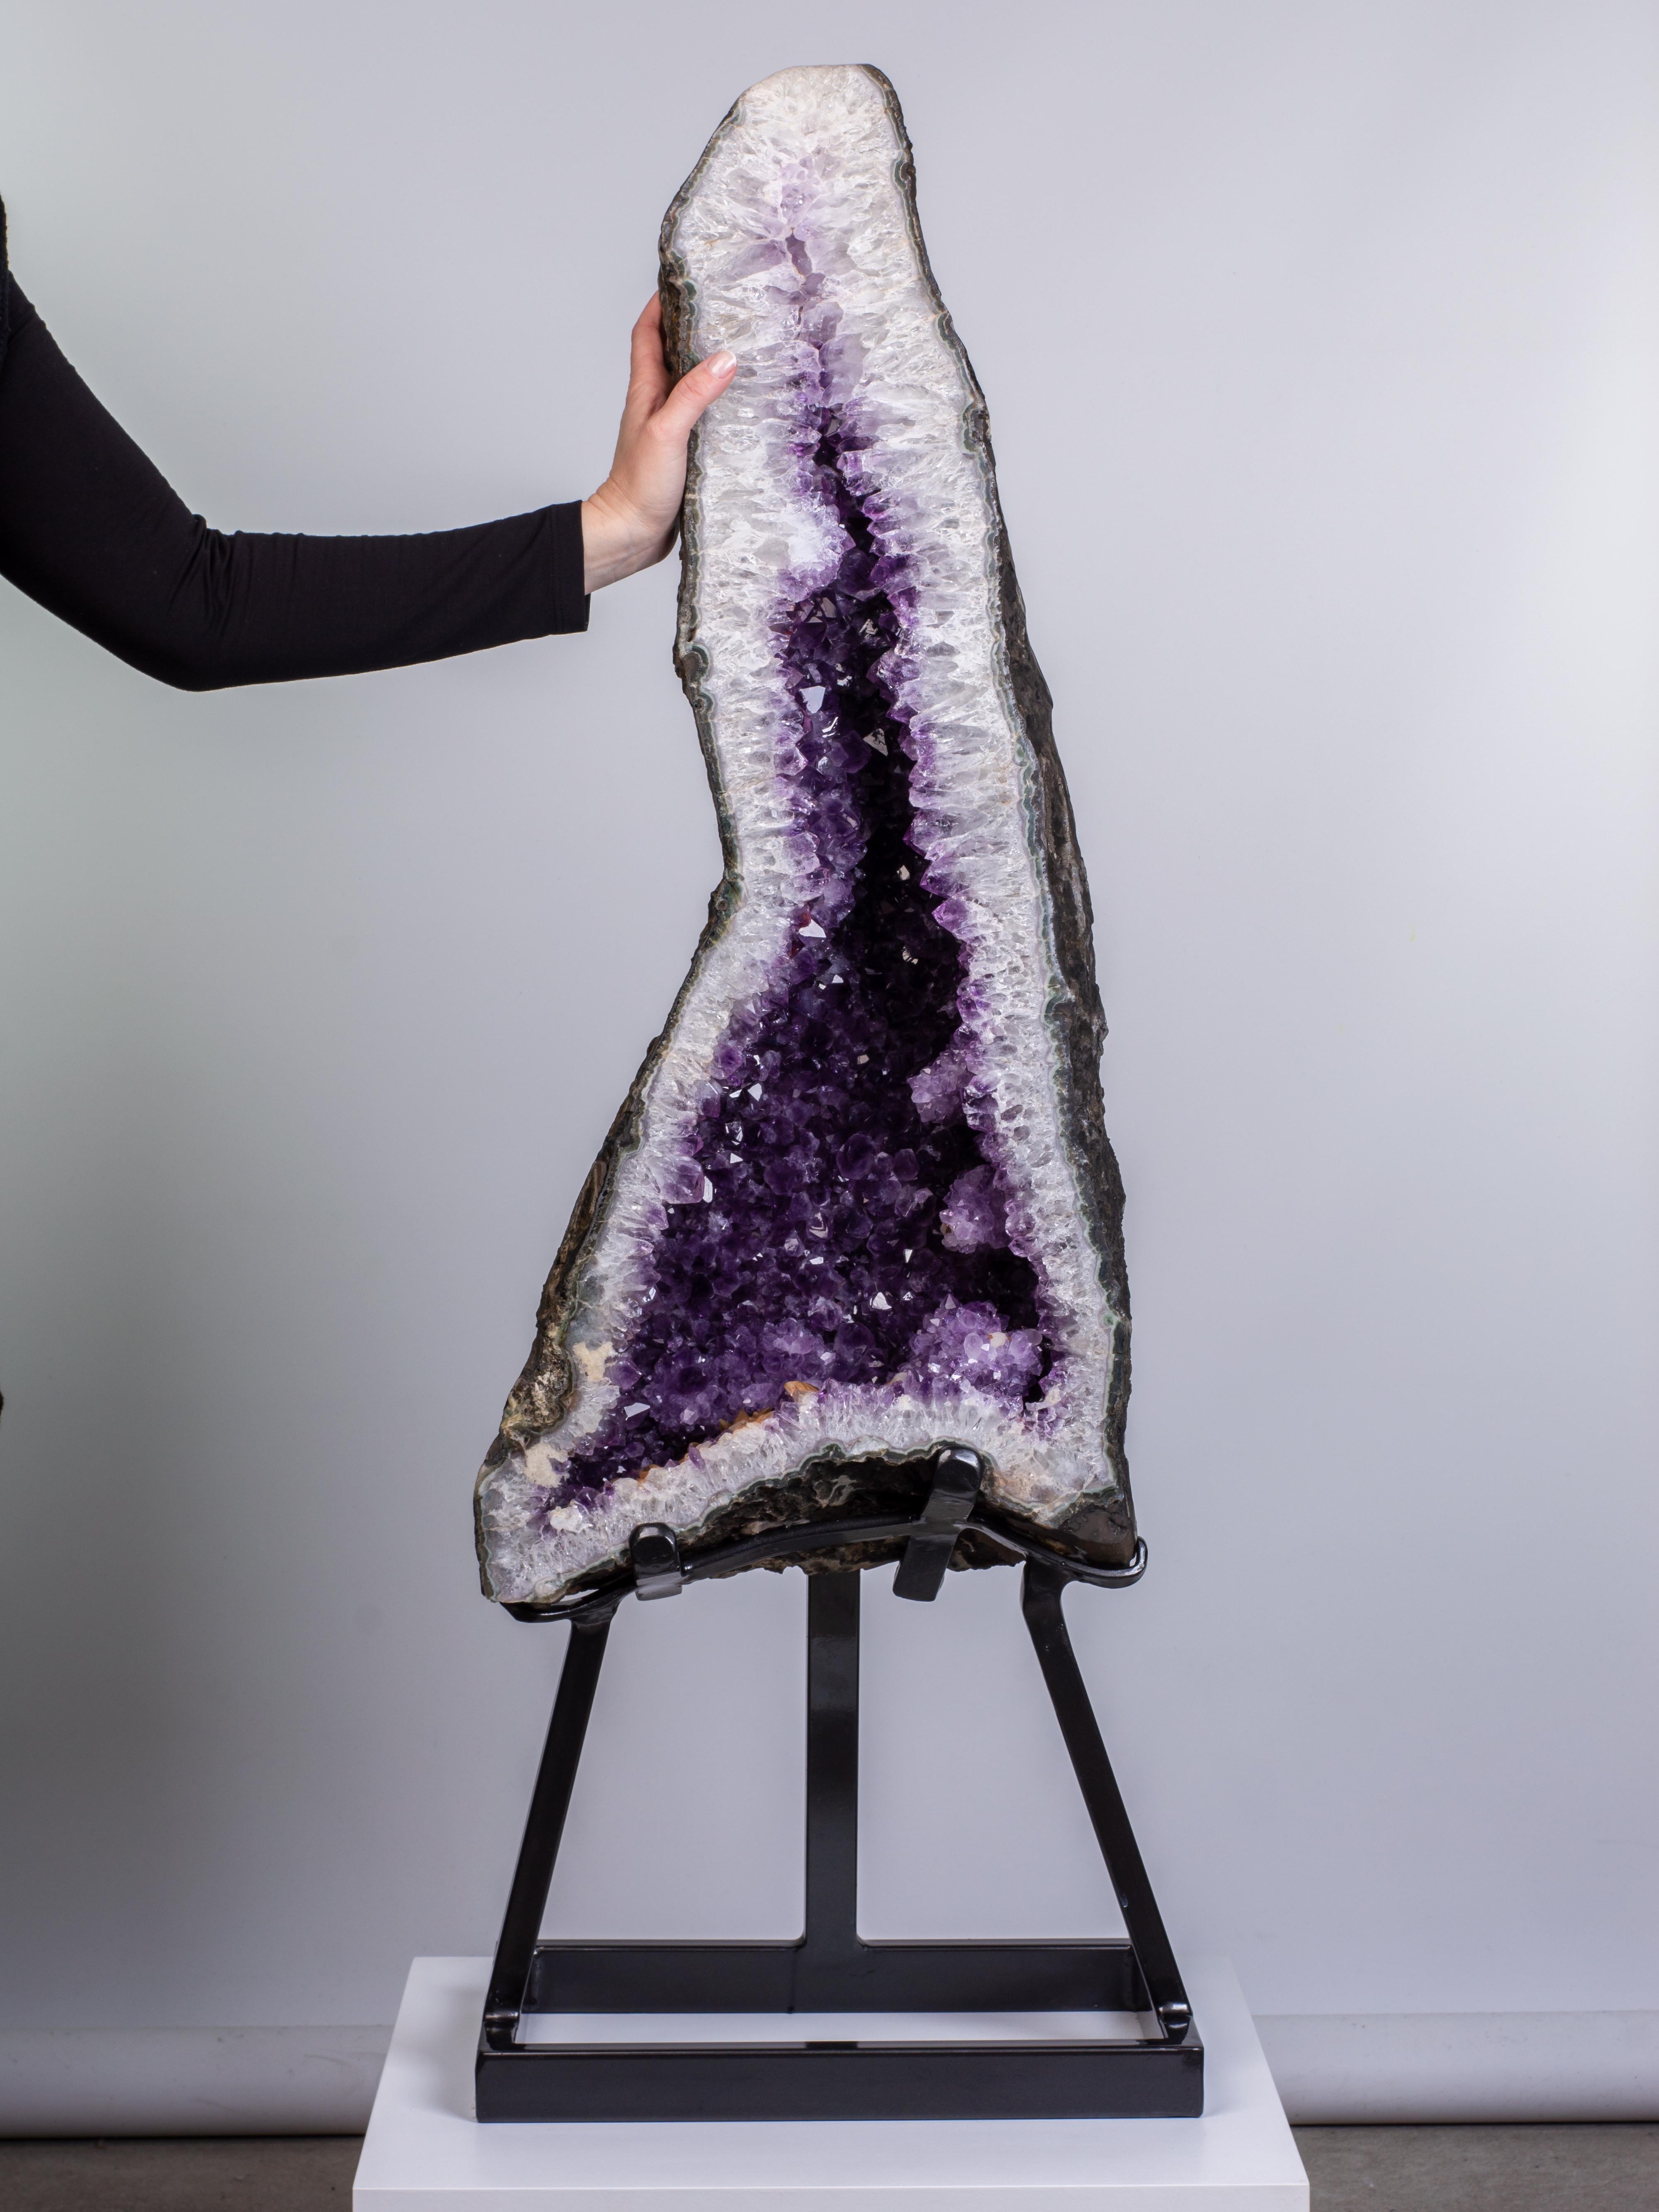 This large amethyst chapel, a complete half of the original geode, shows
deep purple amethyst crystals punctuated with small stalactites and overlaid
in places with tan coloured druzy quartz. The thick white quartz borders
lie inside a thin